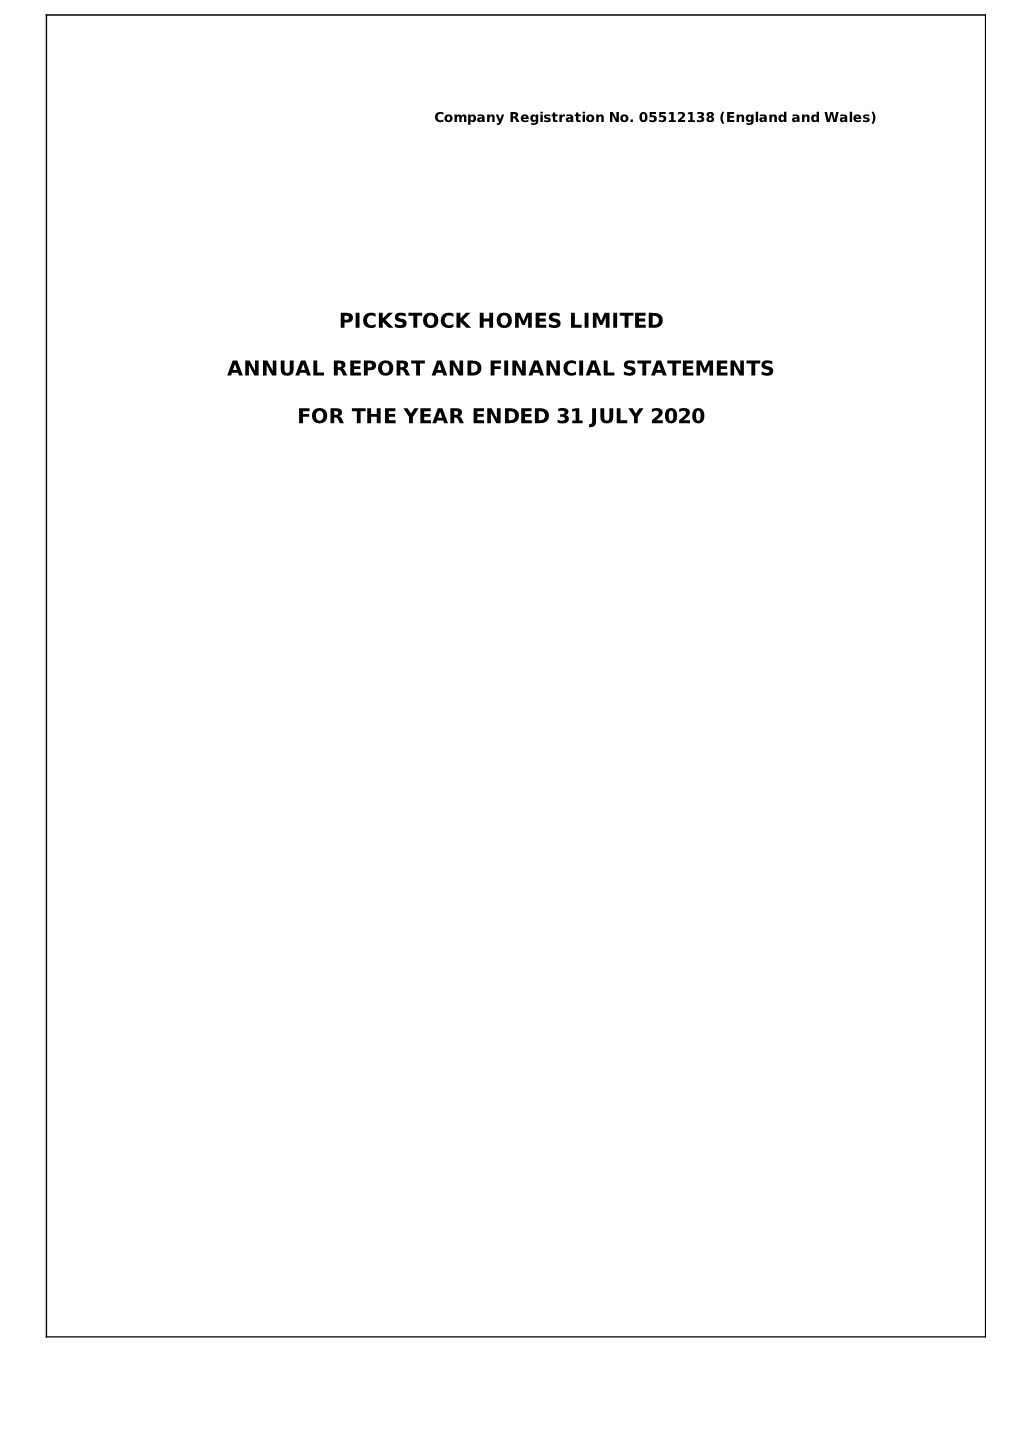 Pickstock Homes Limited Annual Report and Financial